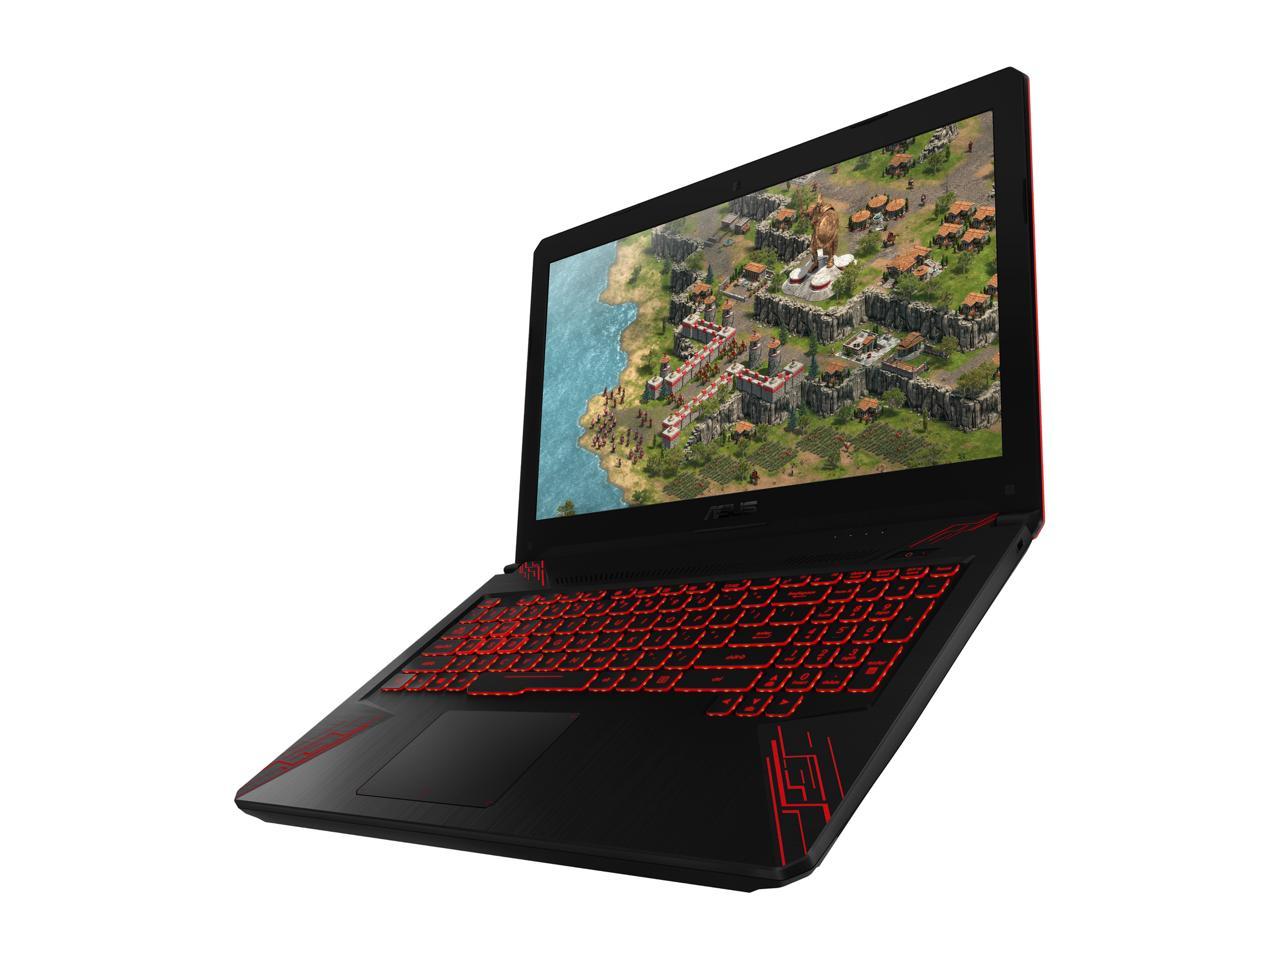 Asus tuf gaming intel core i7. ASUS TUF fx504gd. Ноутбук ASUS TUF Gaming fx504. ASUS TUF 504. ASUS fx504gd-e41023t.